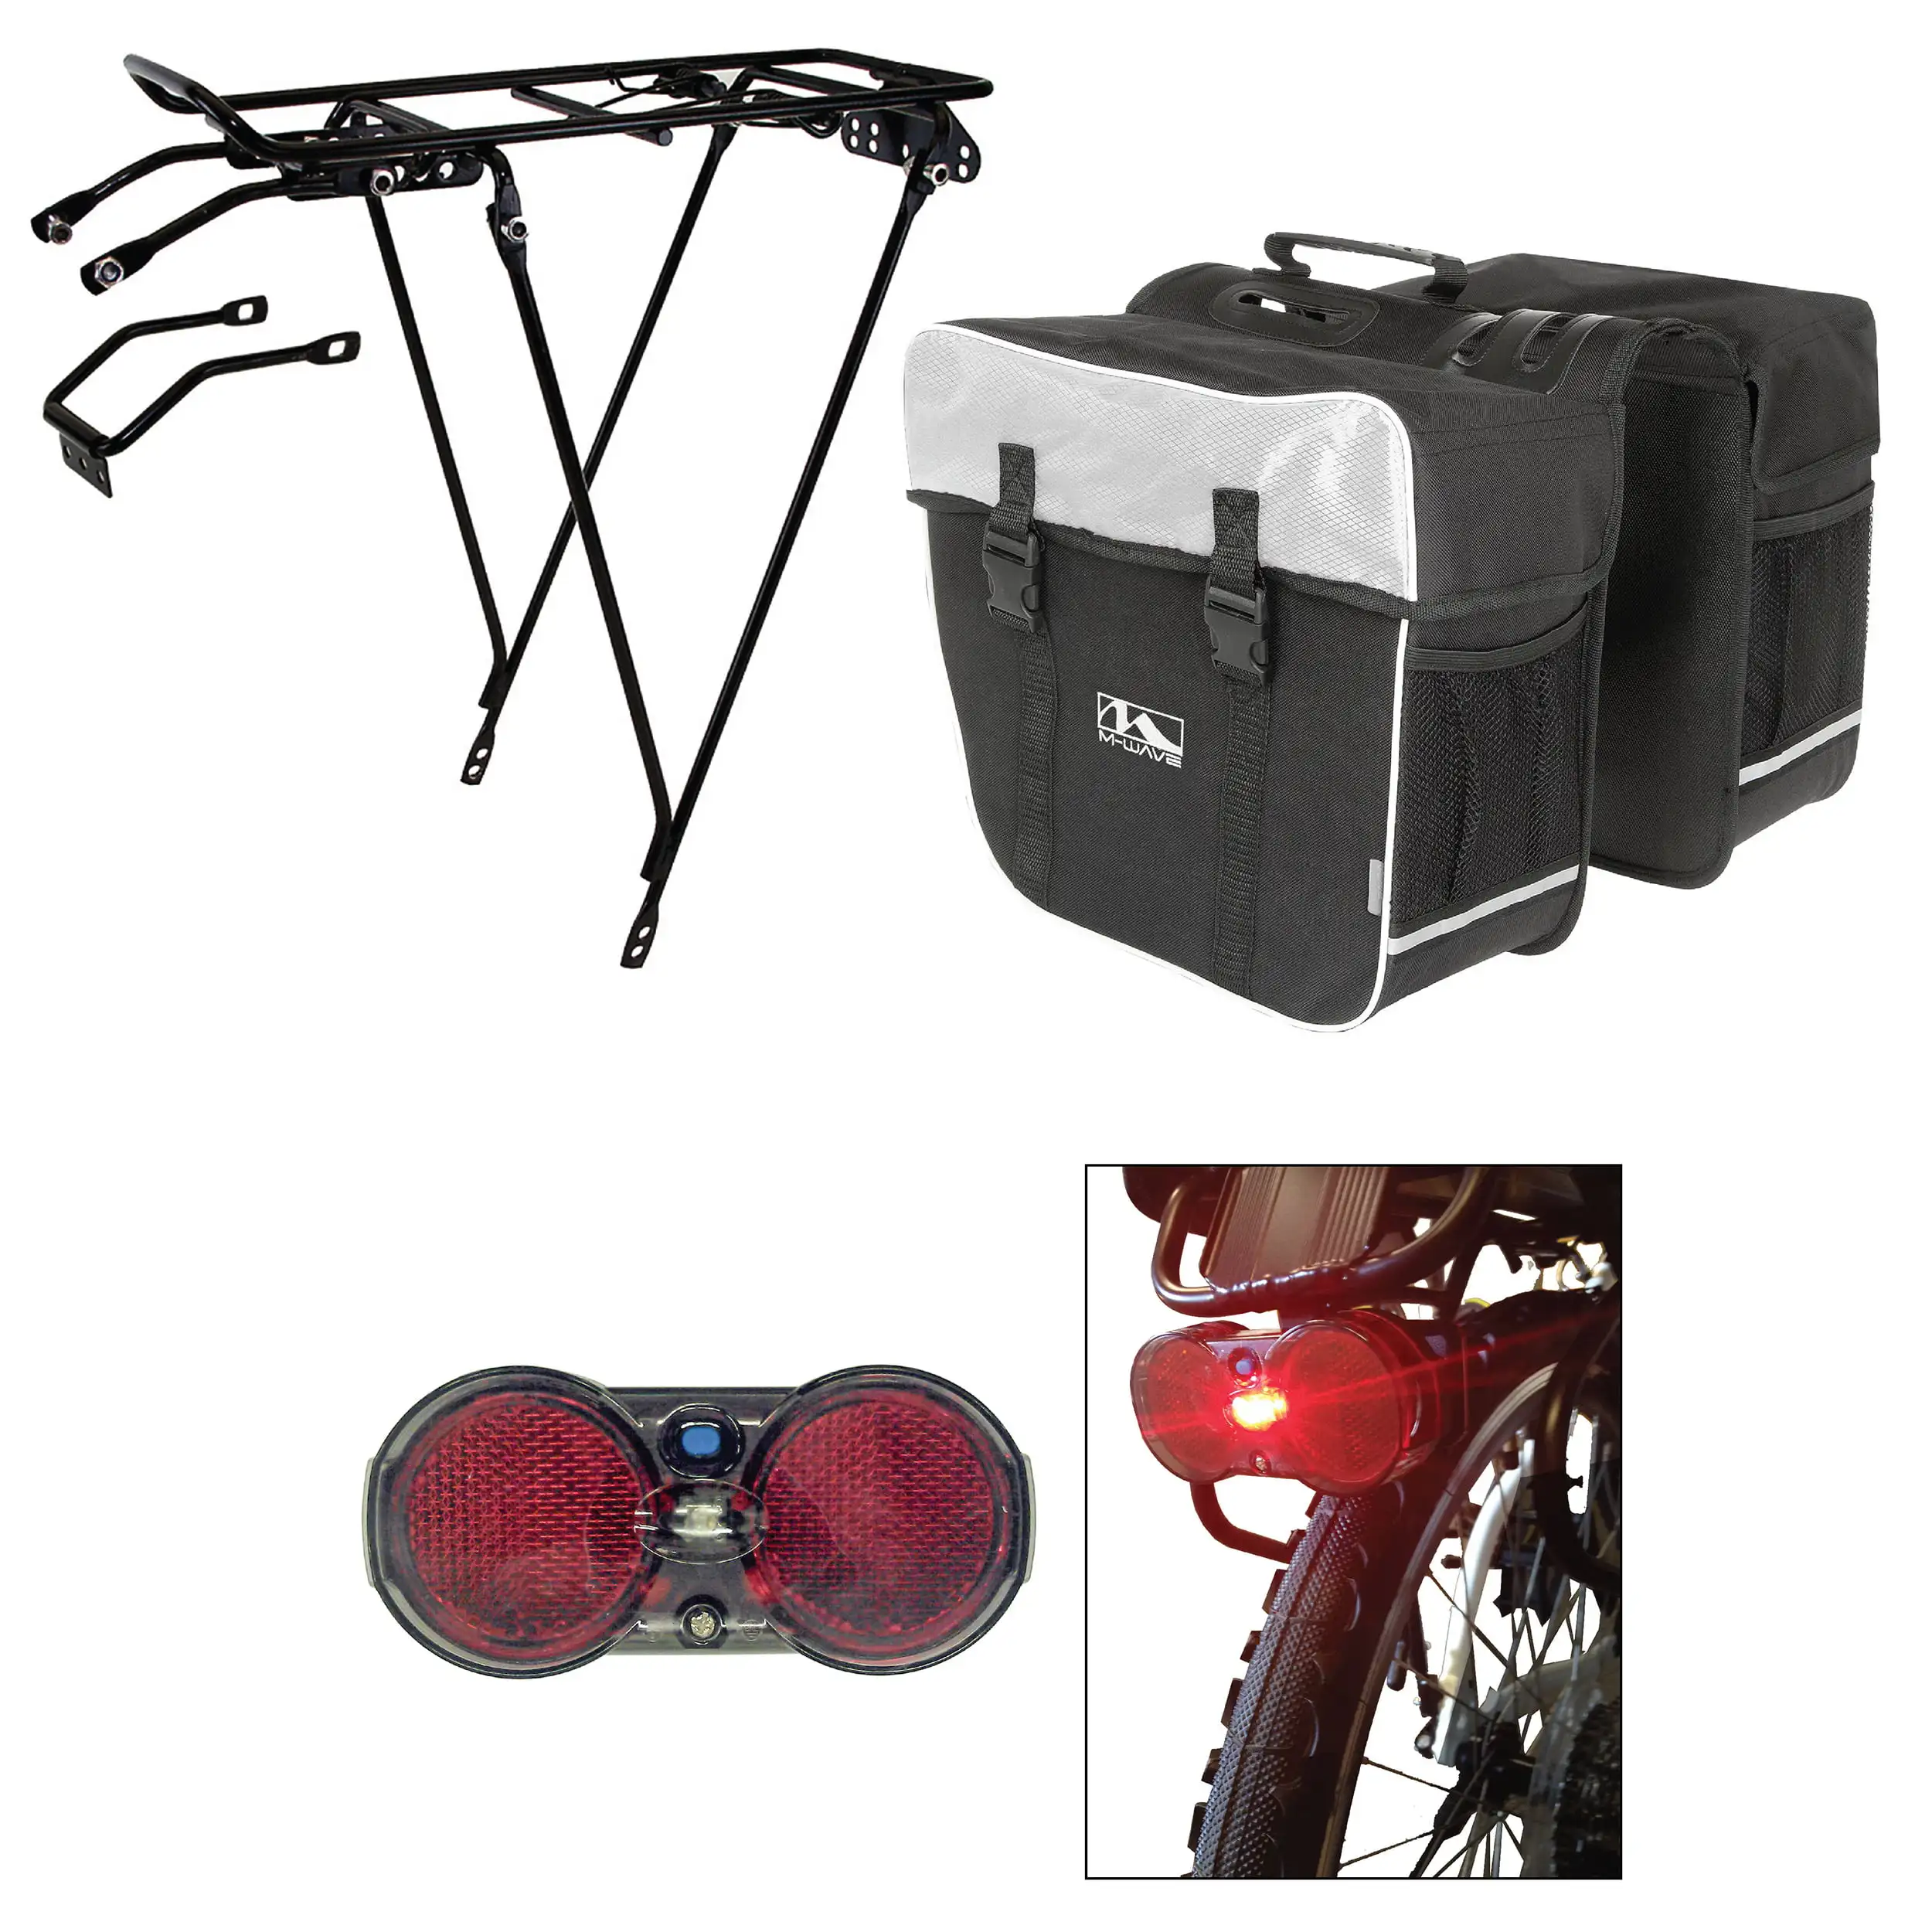 Cycle Force  Rack, Rear Light, and Pannier Bag Bundle, White